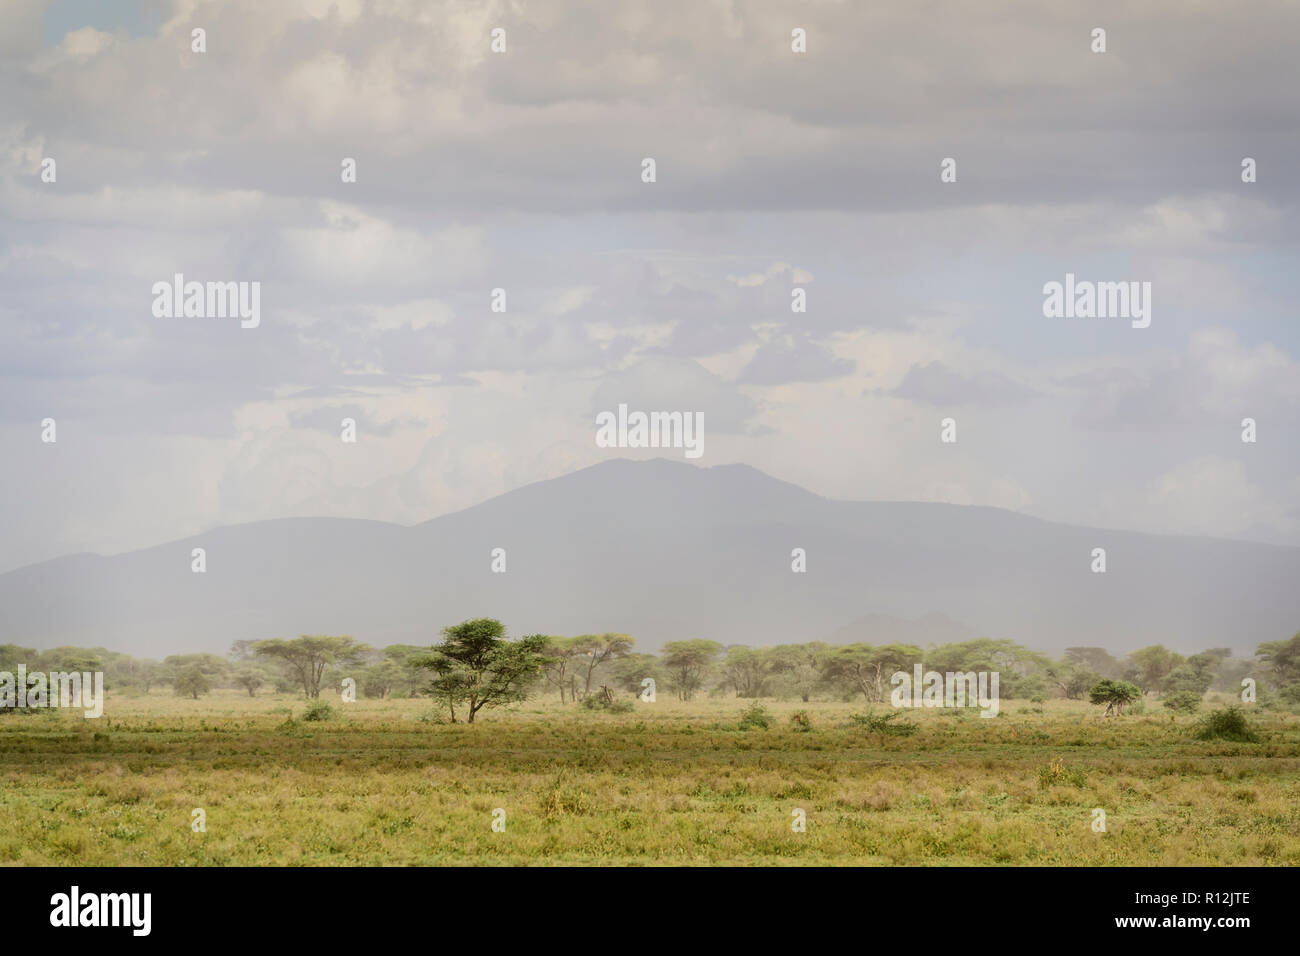 Ngorongoro crater seen from the plains in the Ngorongoro conservation area, Tanzania. Stock Photo